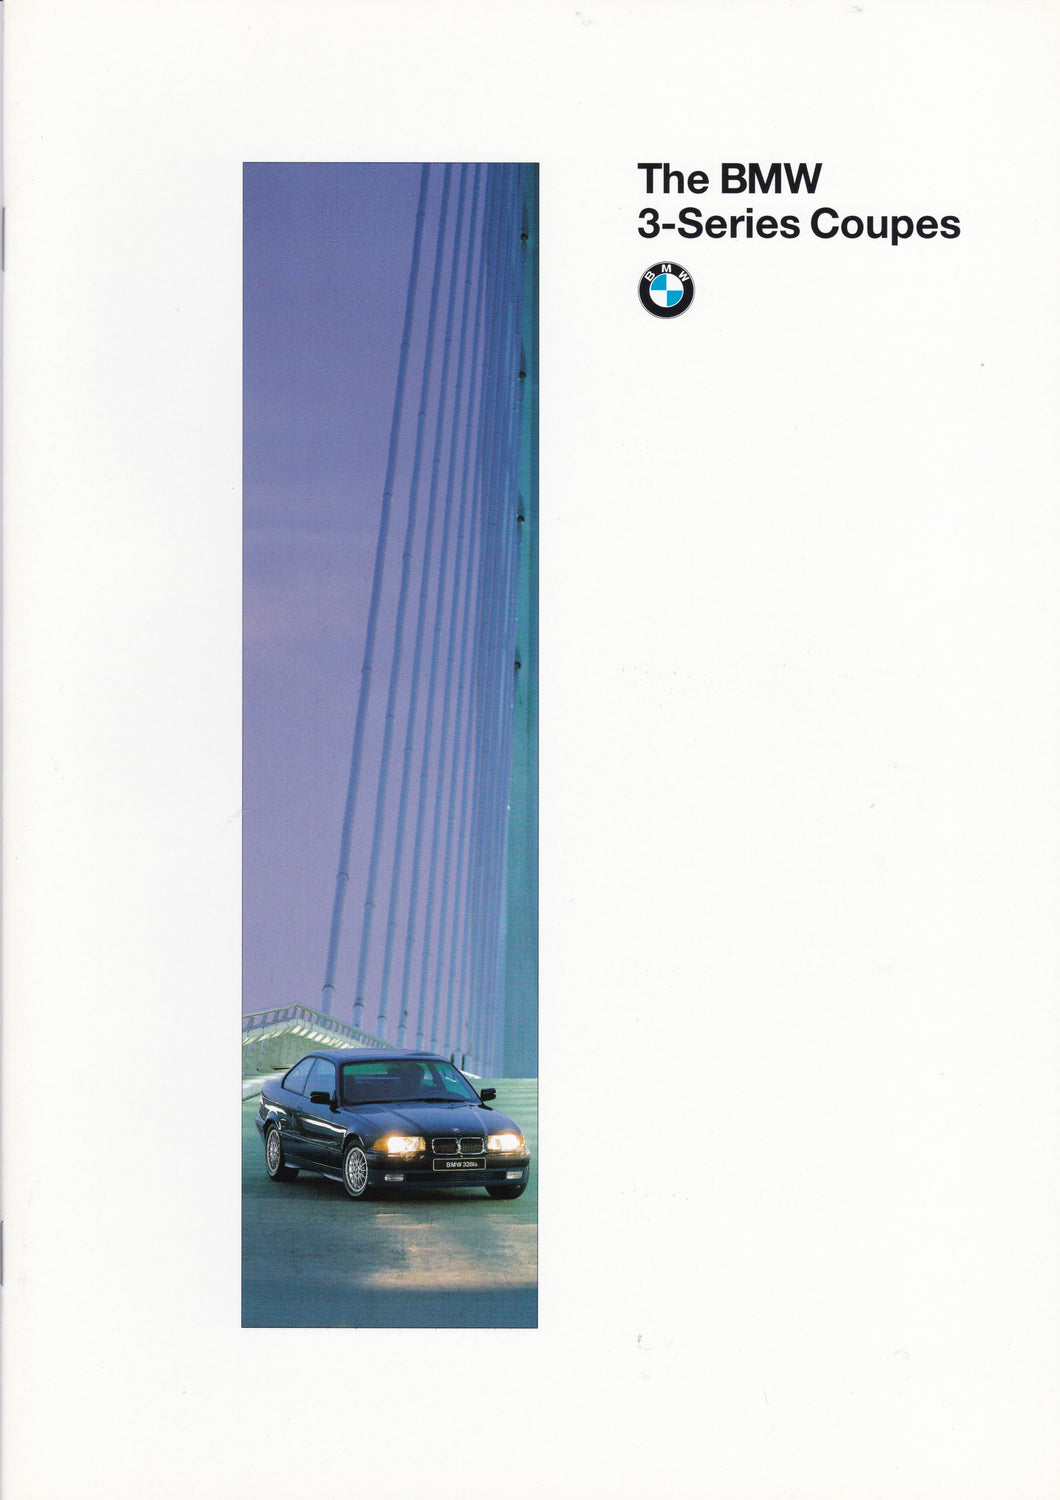 Brochure - The BMW 3-Series Coupes (E36 1996)